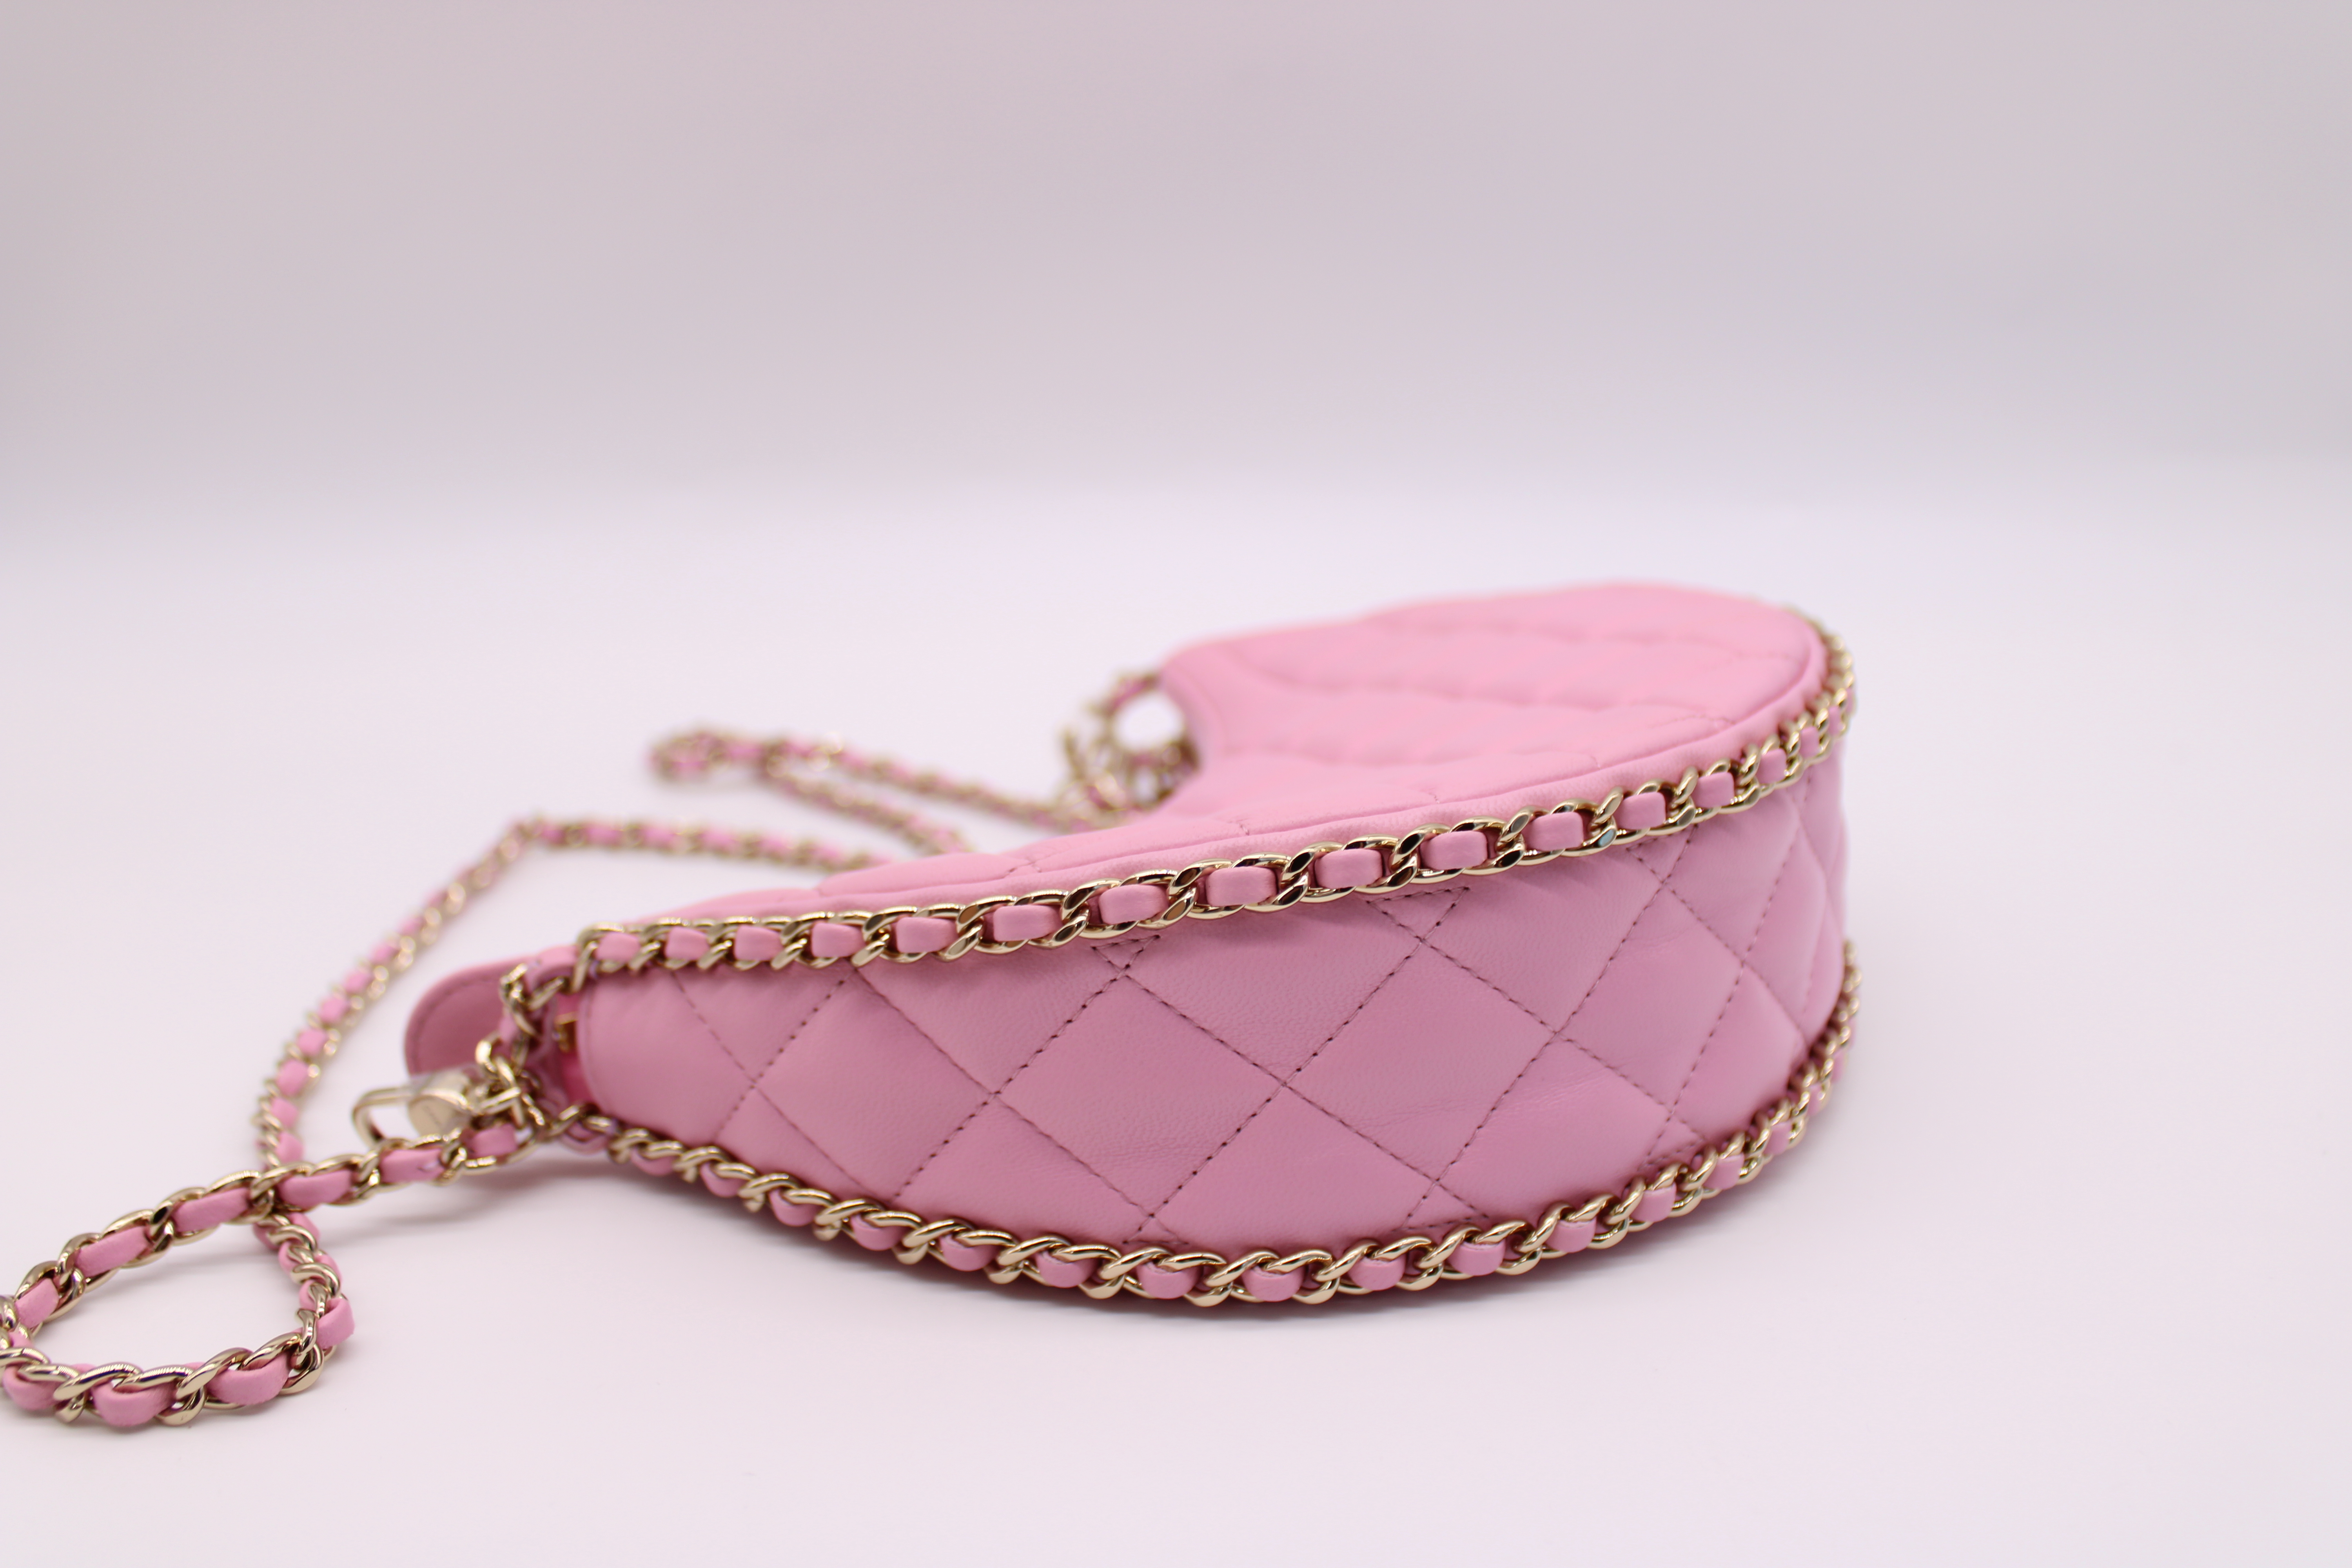 CHANEL 22k AS3562 Hobo Pink - SANDRA BOUTIQUE